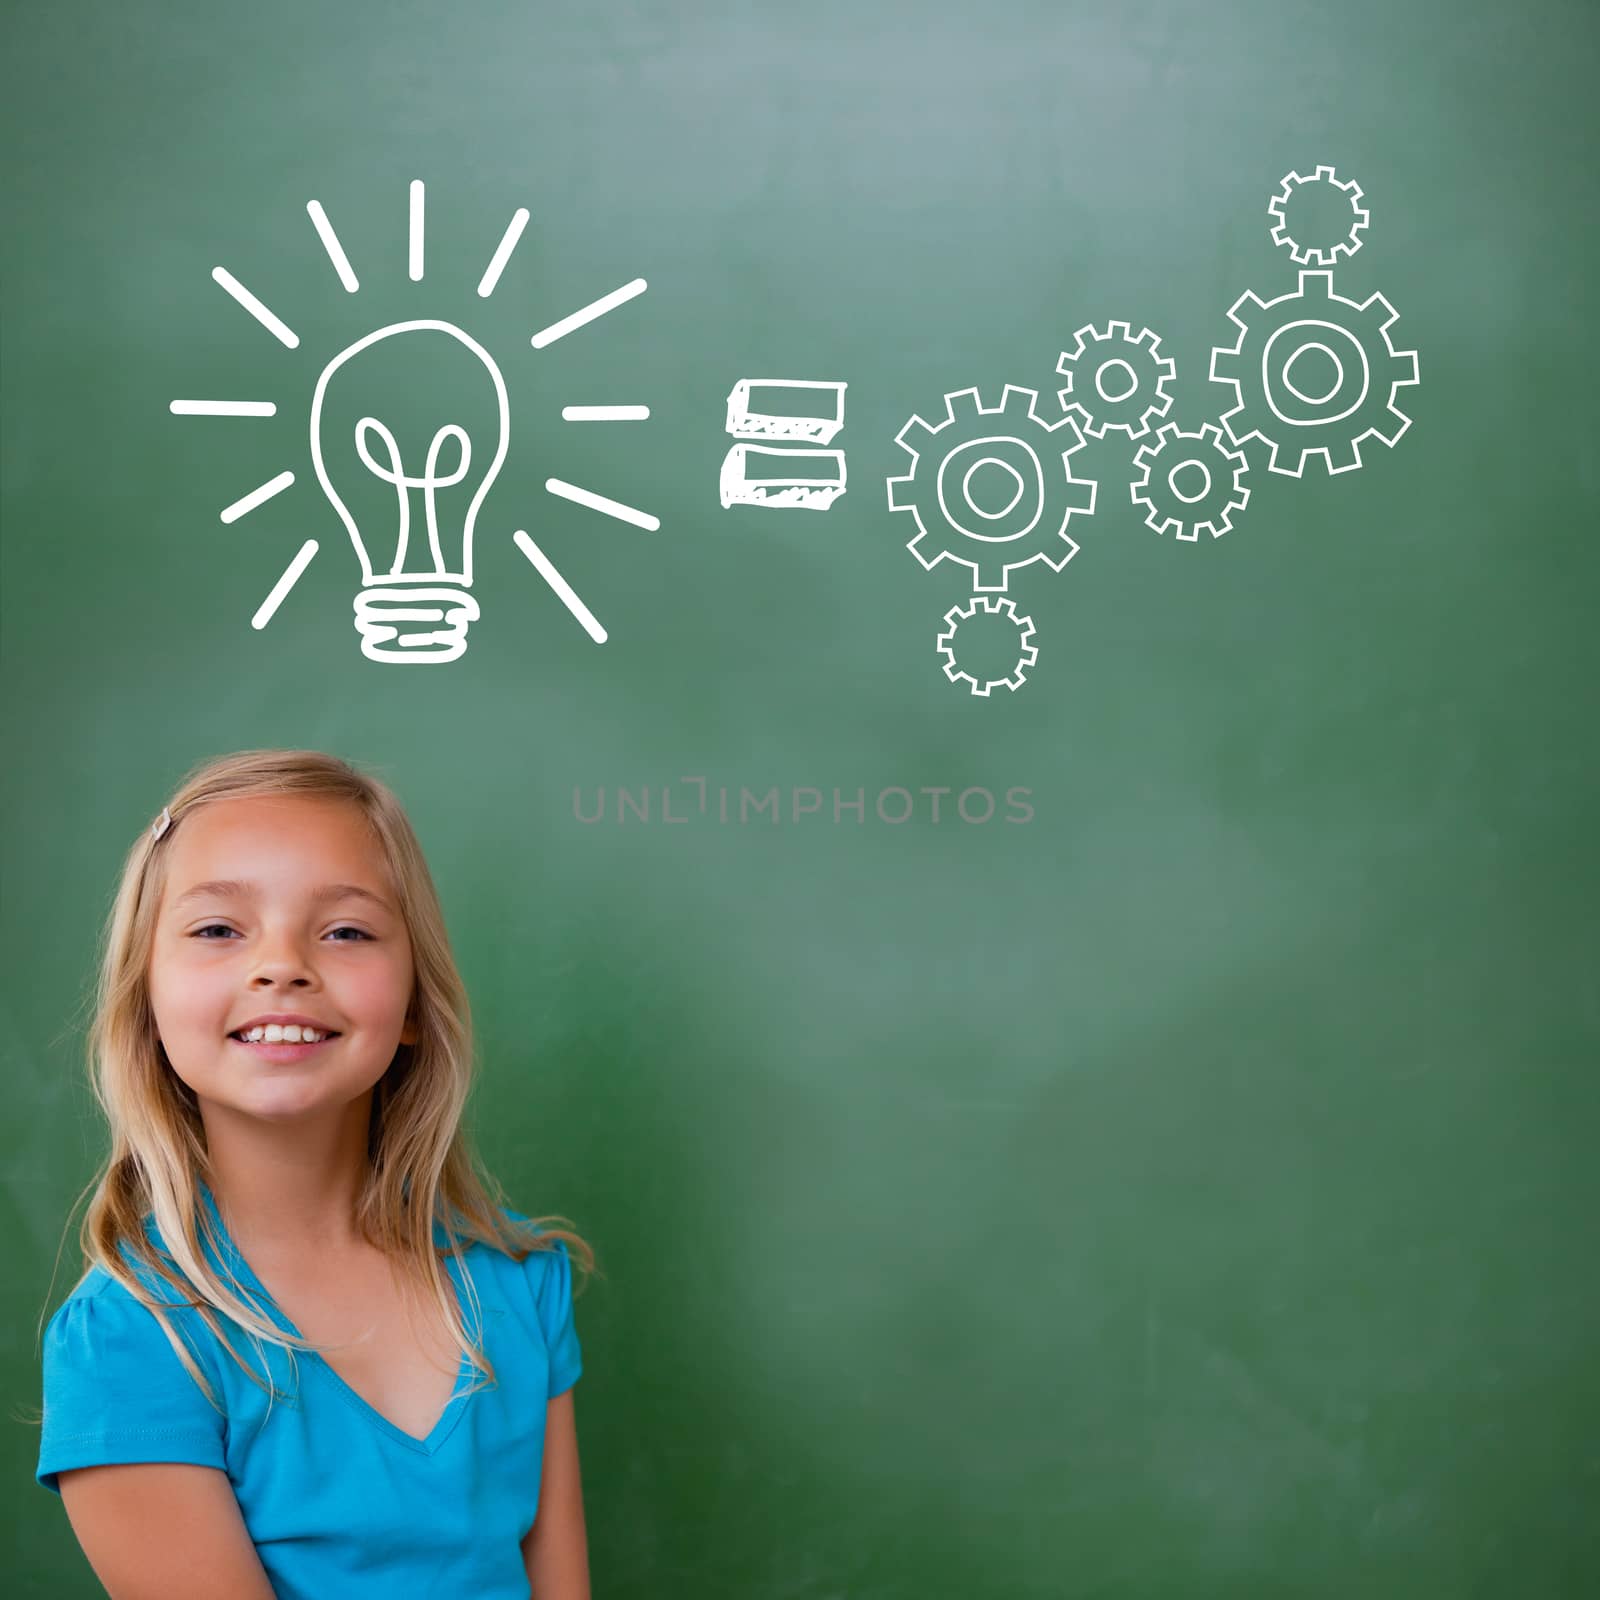 Idea and innovation graphic against cute pupil smiling